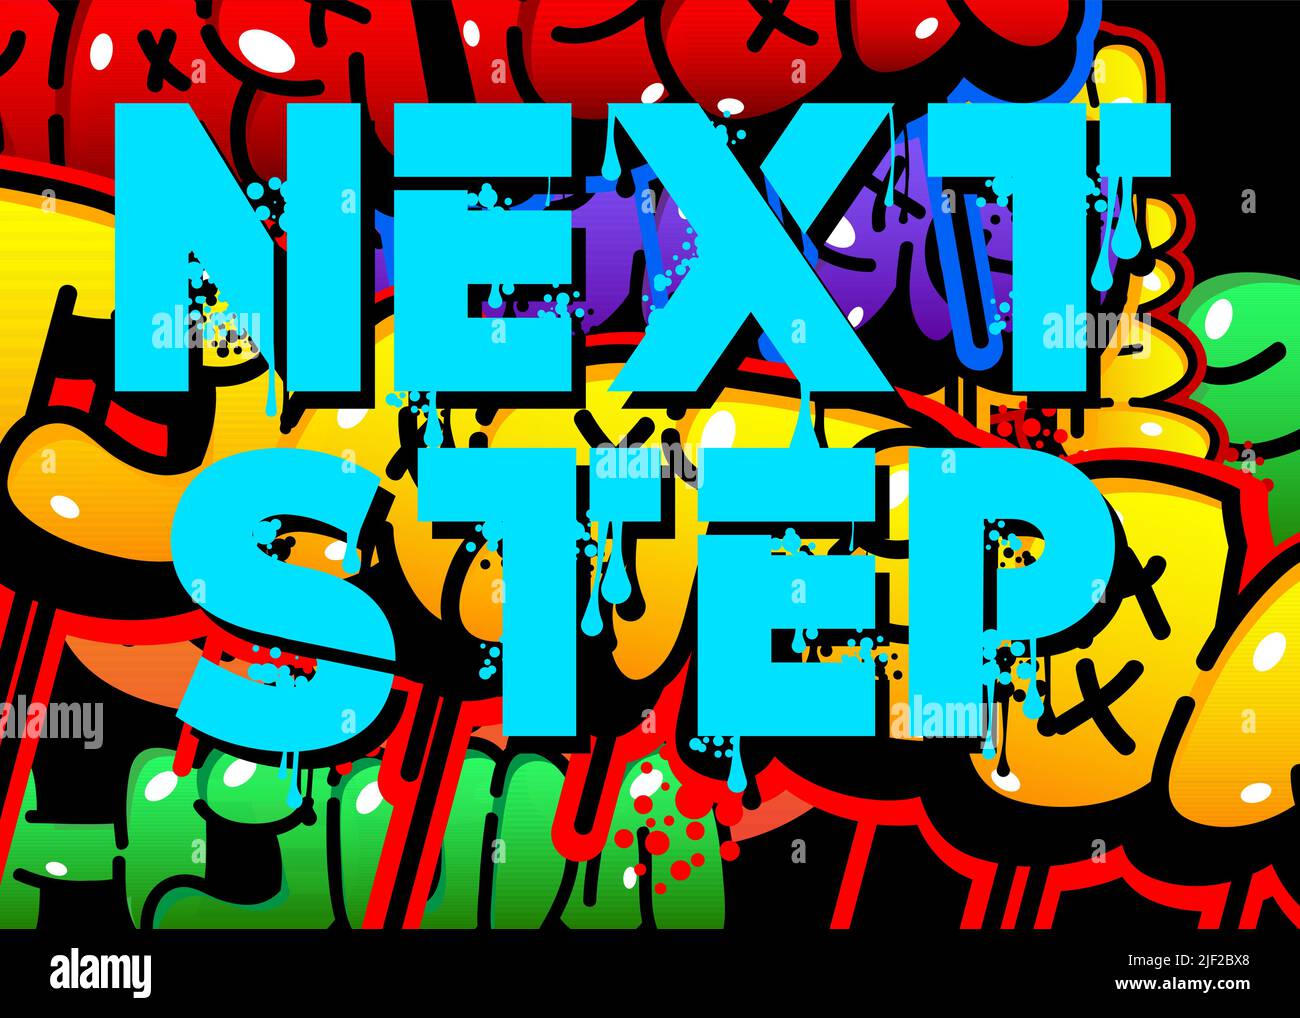 Next Step Graffiti tag. Abstract modern street art decoration performed in urban painting style. Stock Vector